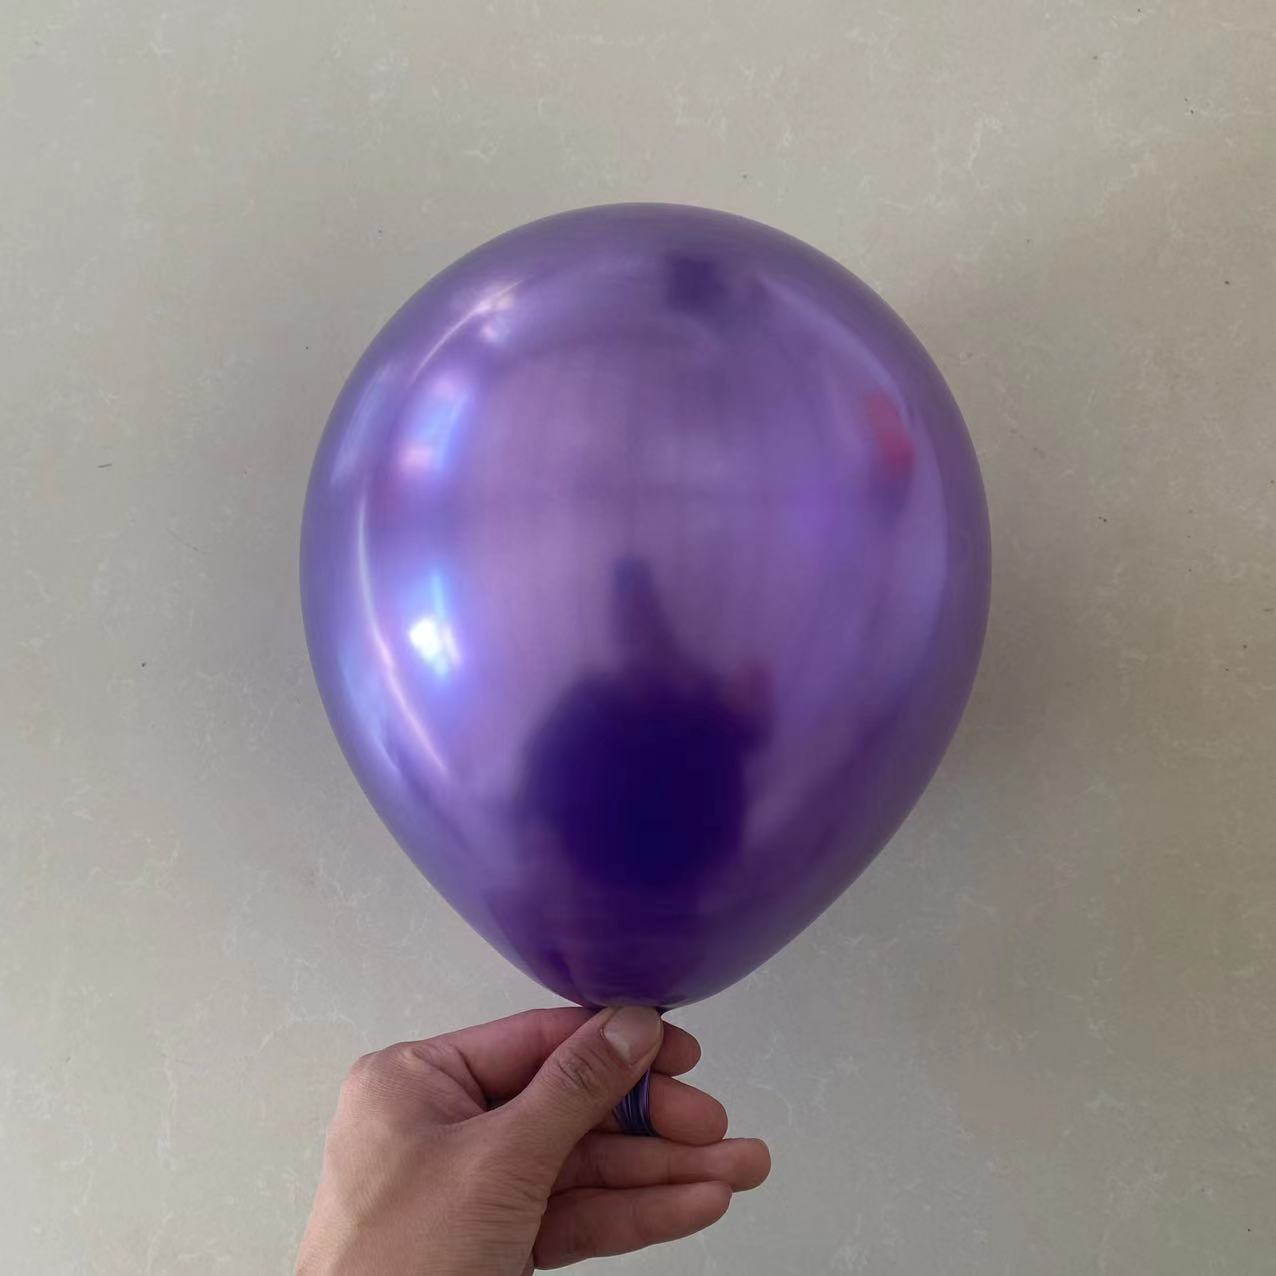 1.8G Thick Metal Balloon 10-Inch Rubber Balloons Birthday Party Decoration Wedding and Wedding Room Layout Balloon Dress up